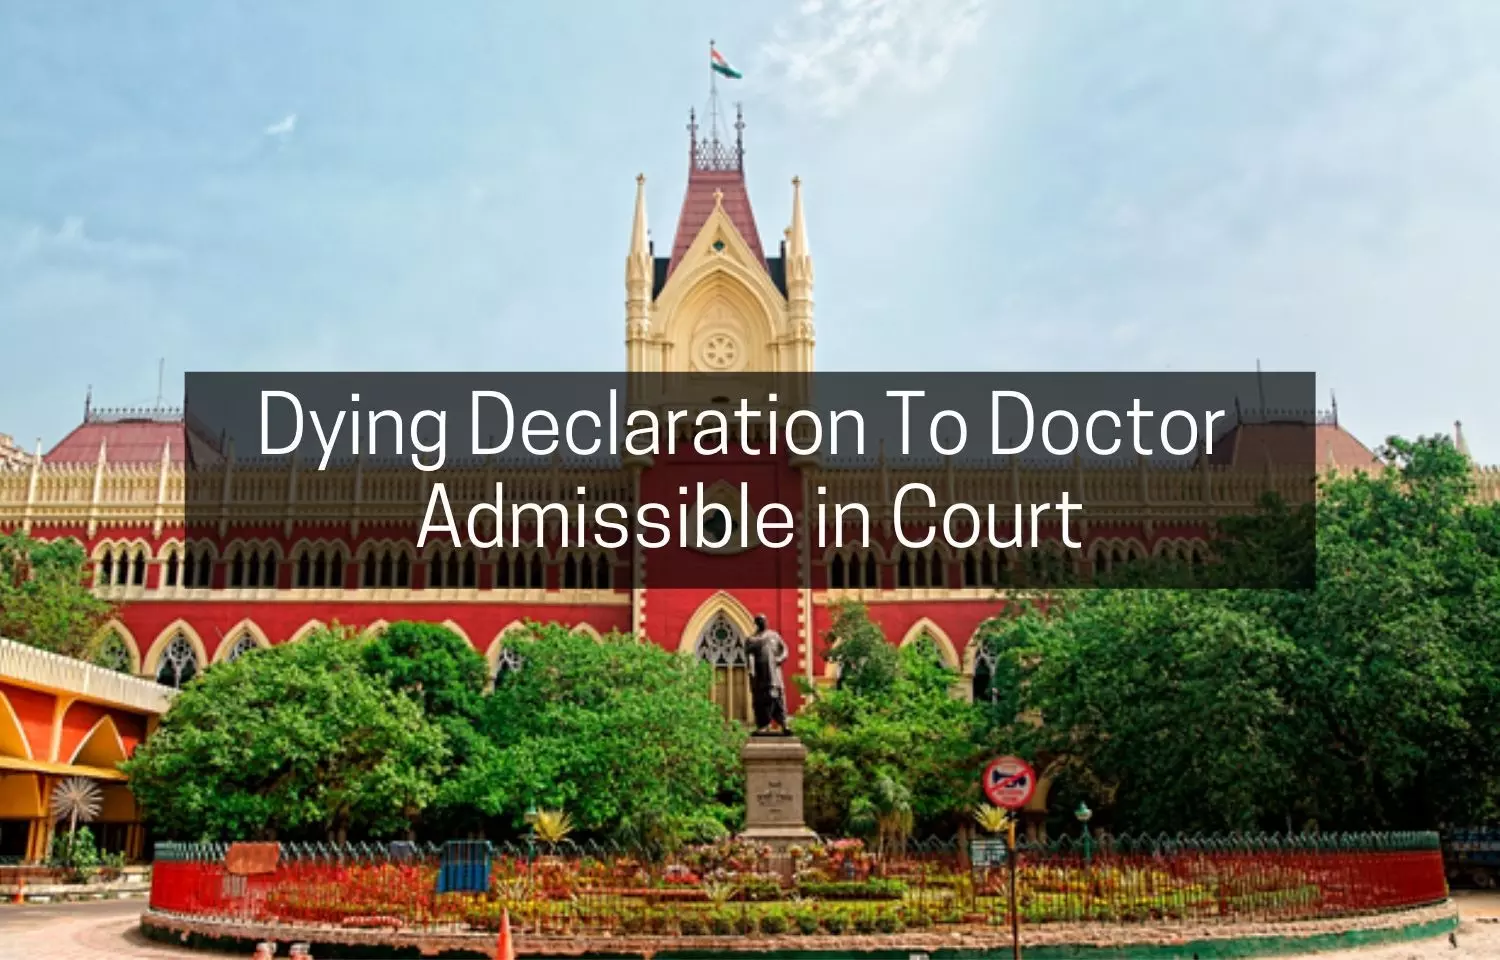 Dying Declaration Made to Doctor Admissible in Court: Orissa HC